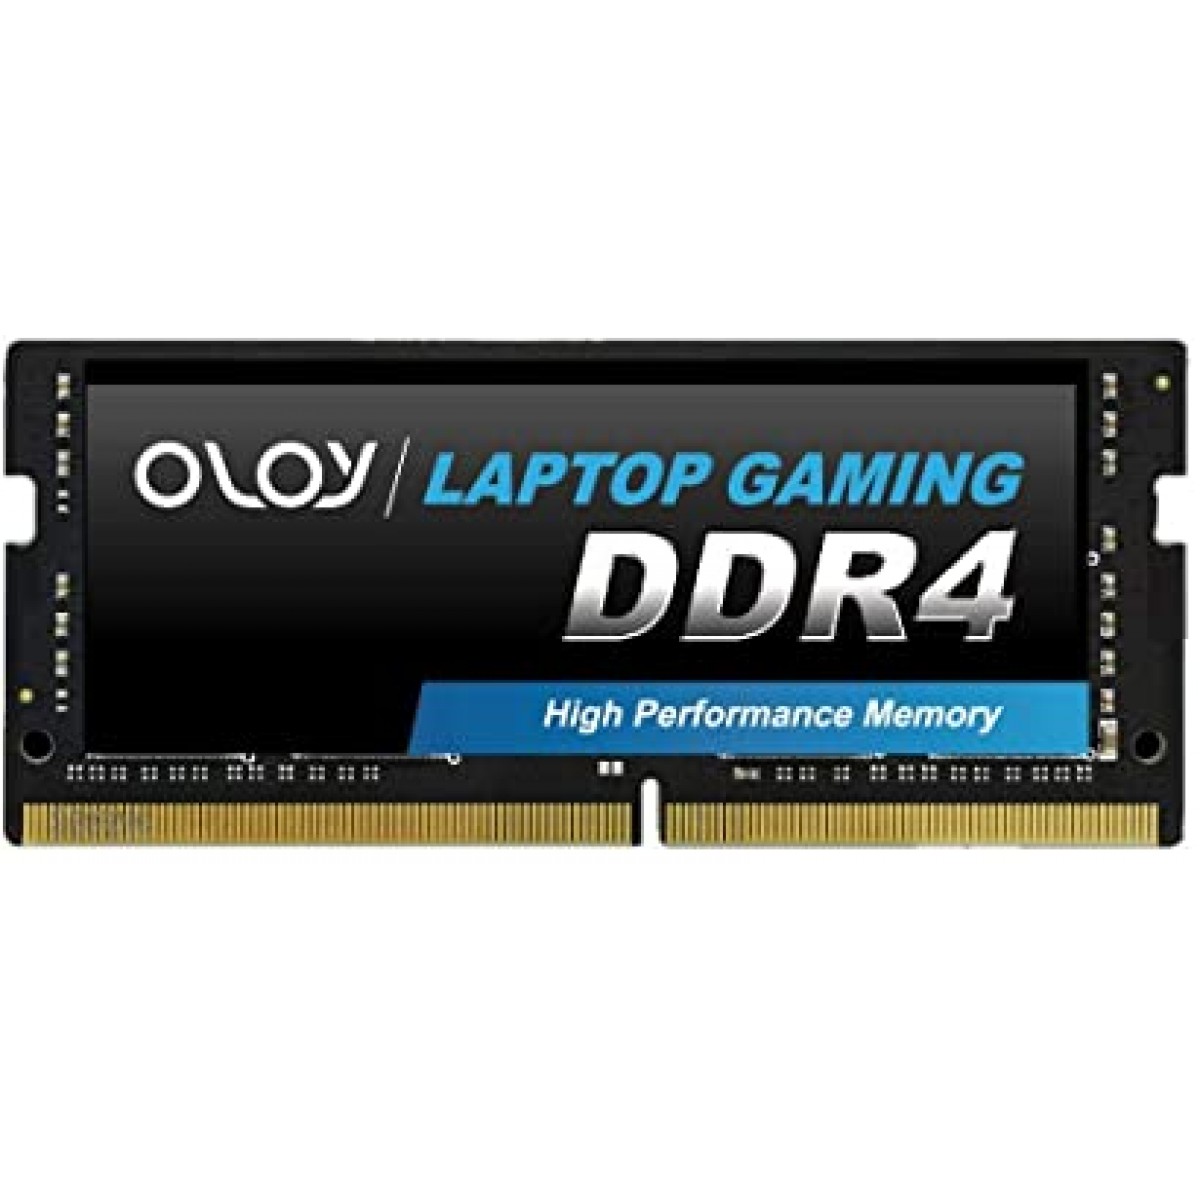 Memória Notebook DDR4 OLOy Laptop Gaming, 8GB, 2666MHZ, MD4S082619IZSC